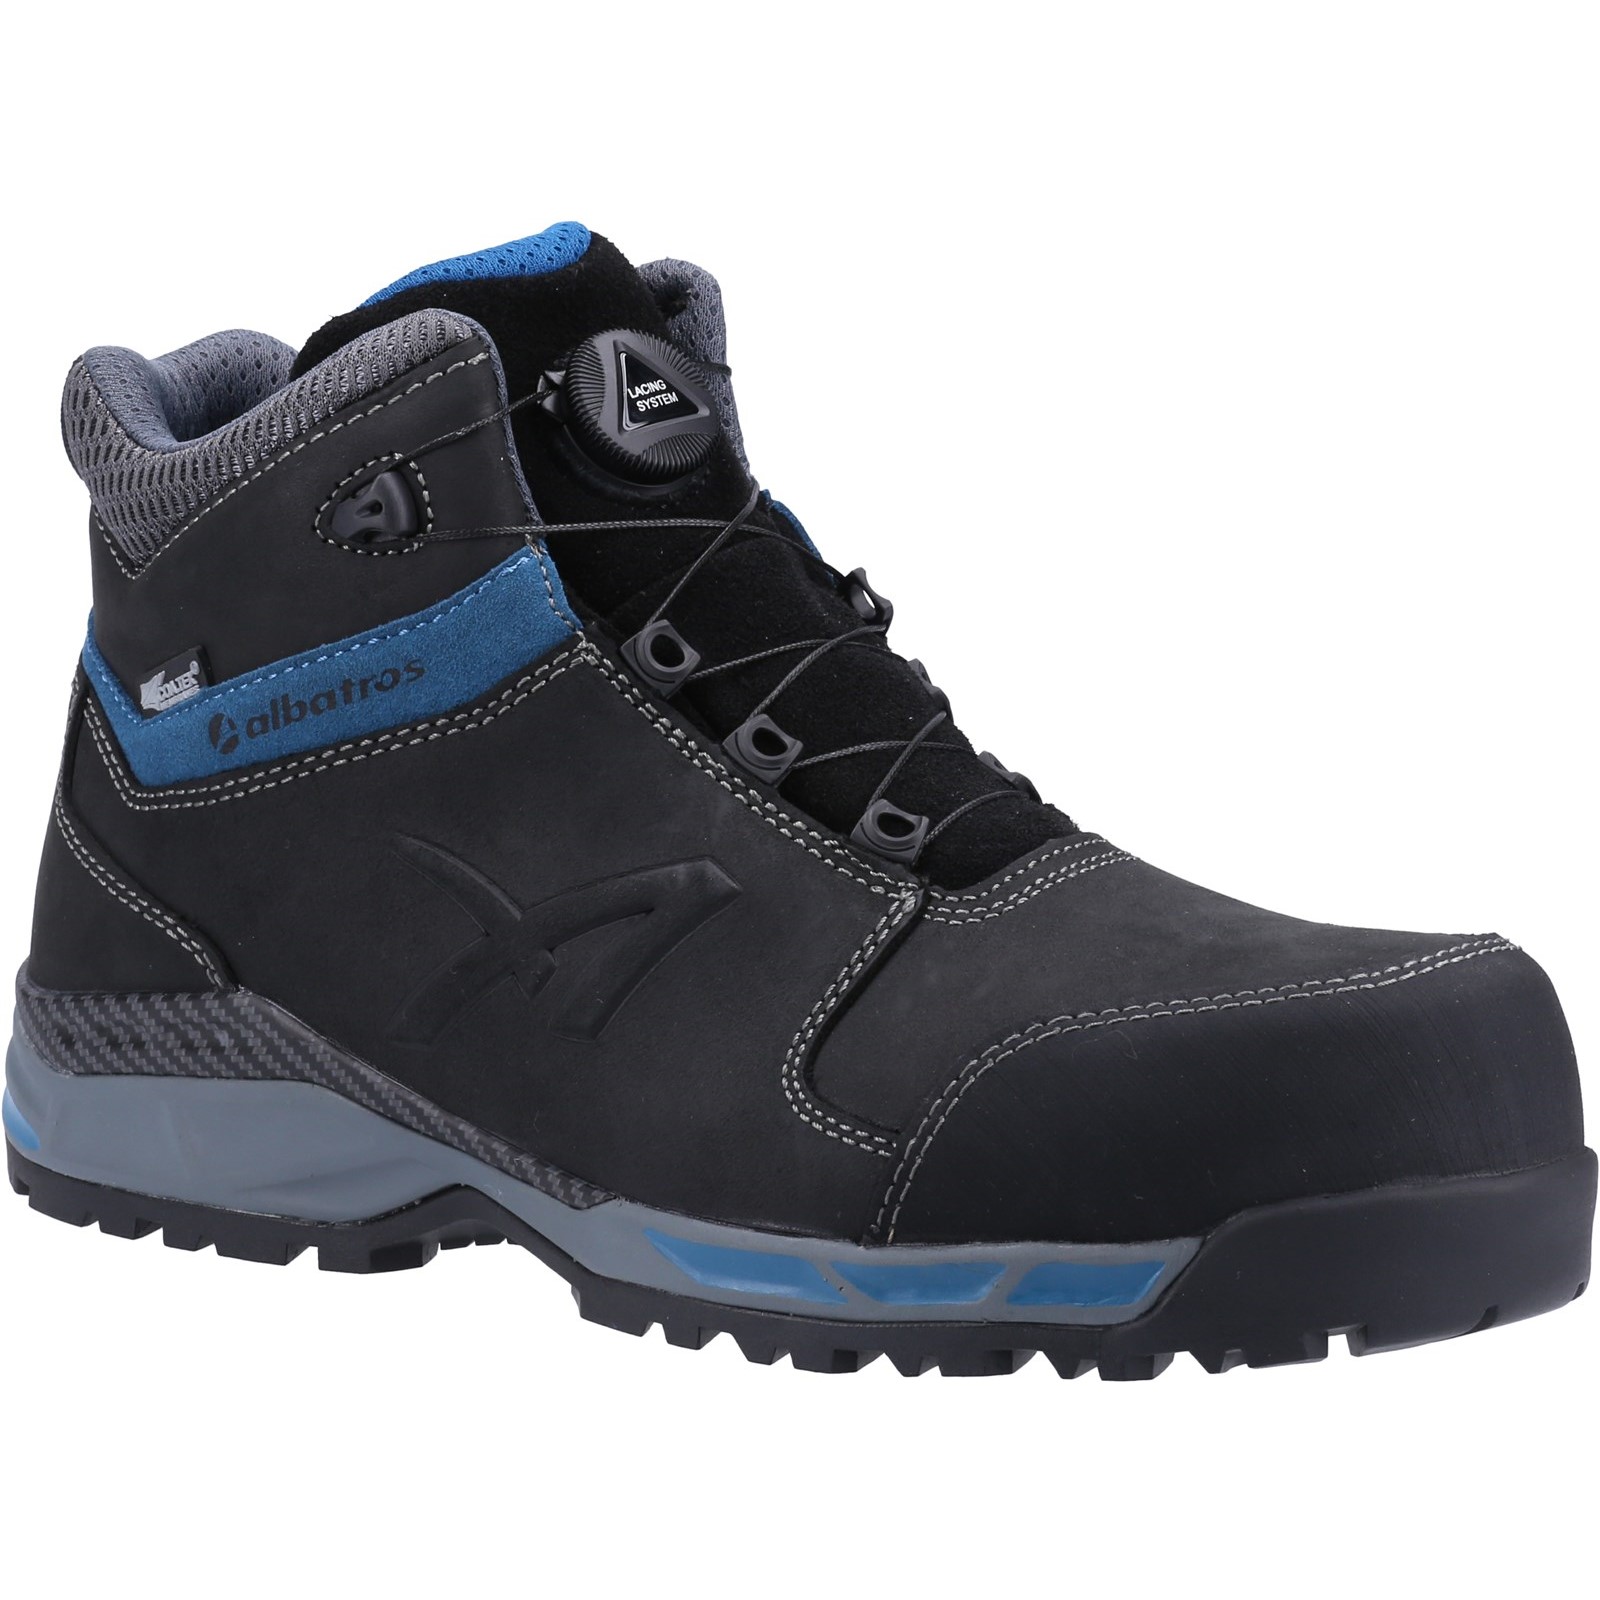 Tofane CTX Mid S3 Safety Boot